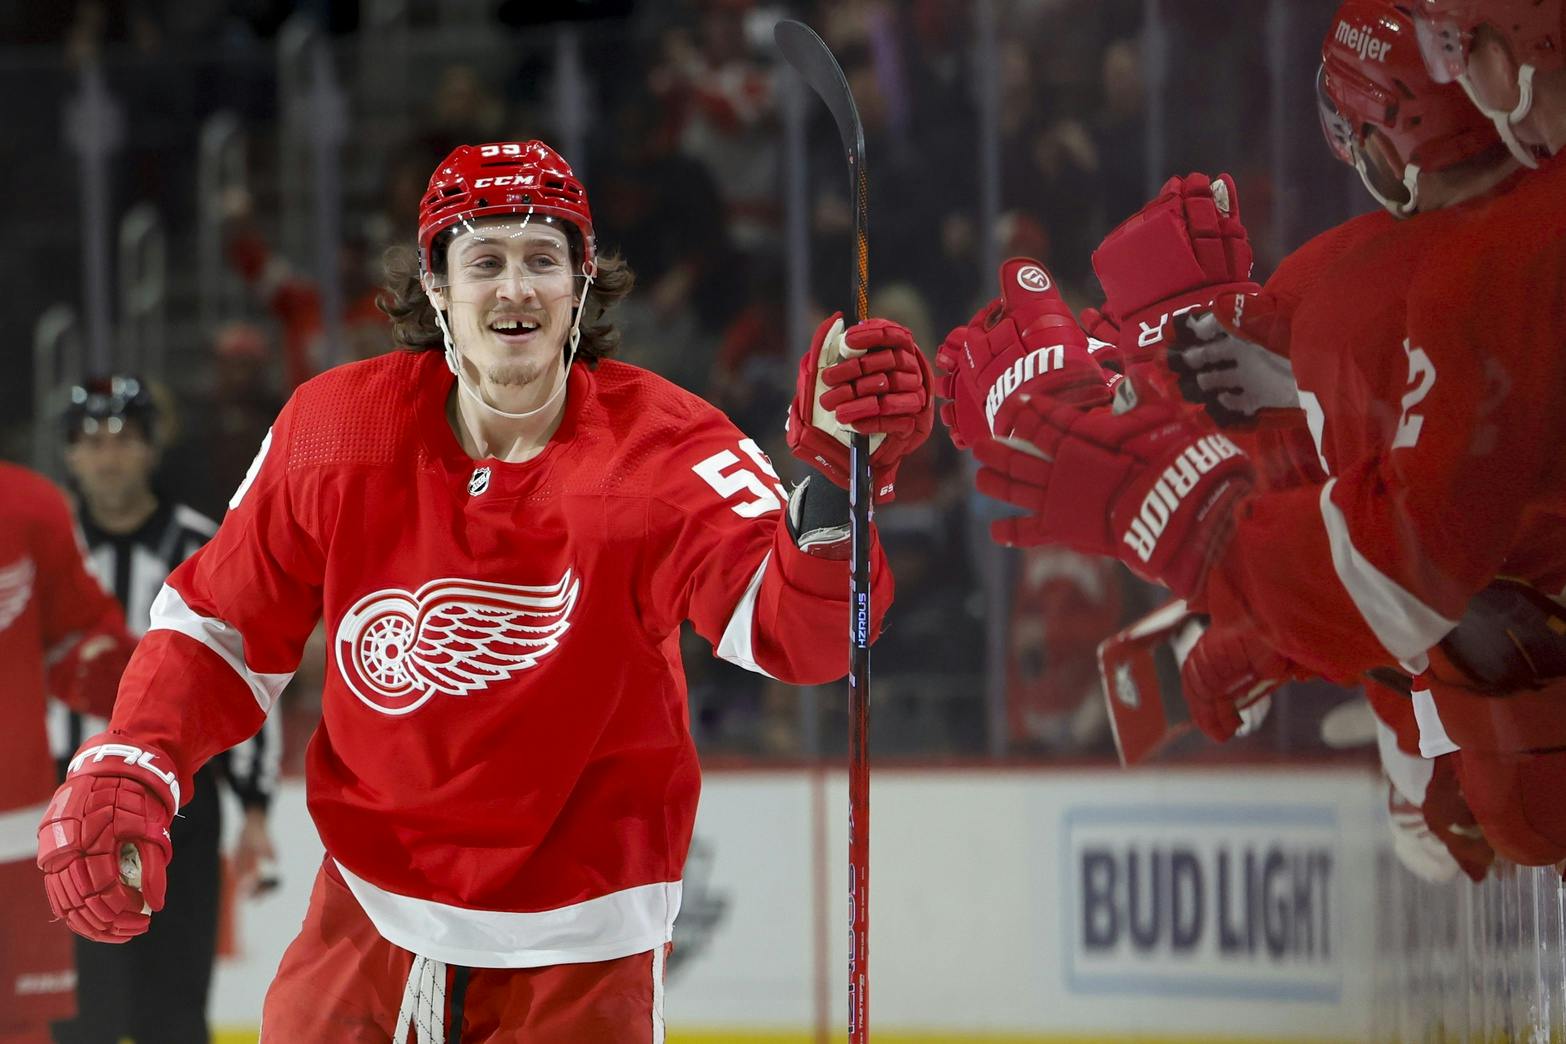 Bertuzzi scores four, but Red Wings lose to Lightning in OT